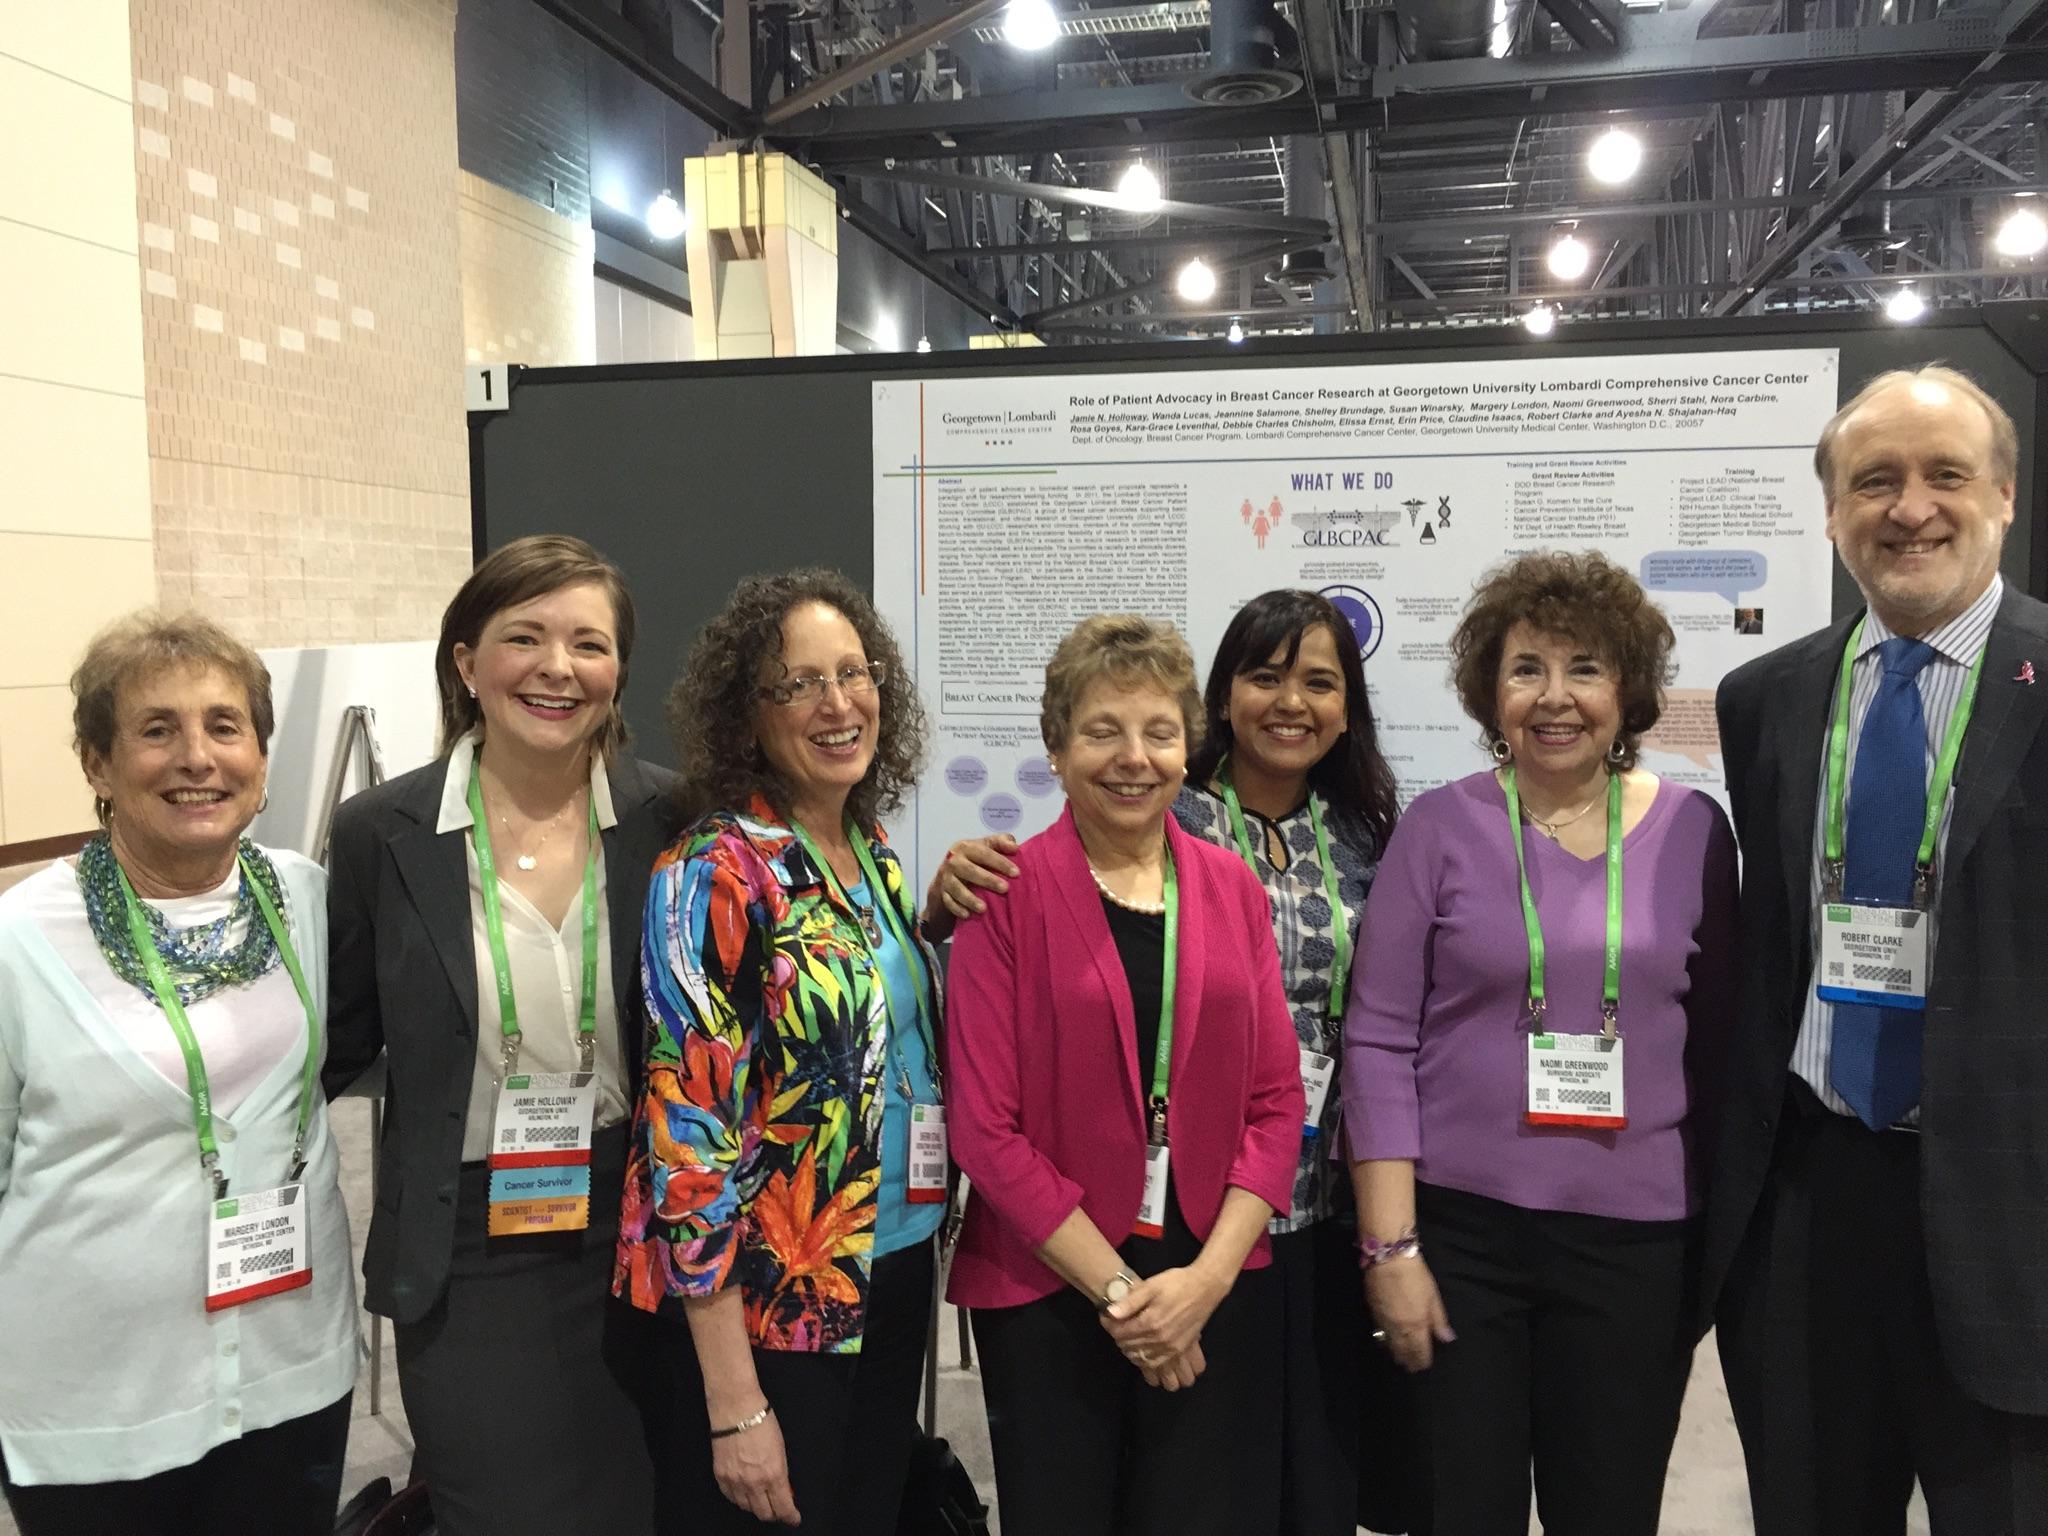 GBCA attendees at American Association of Cancer Research in Philadelphia